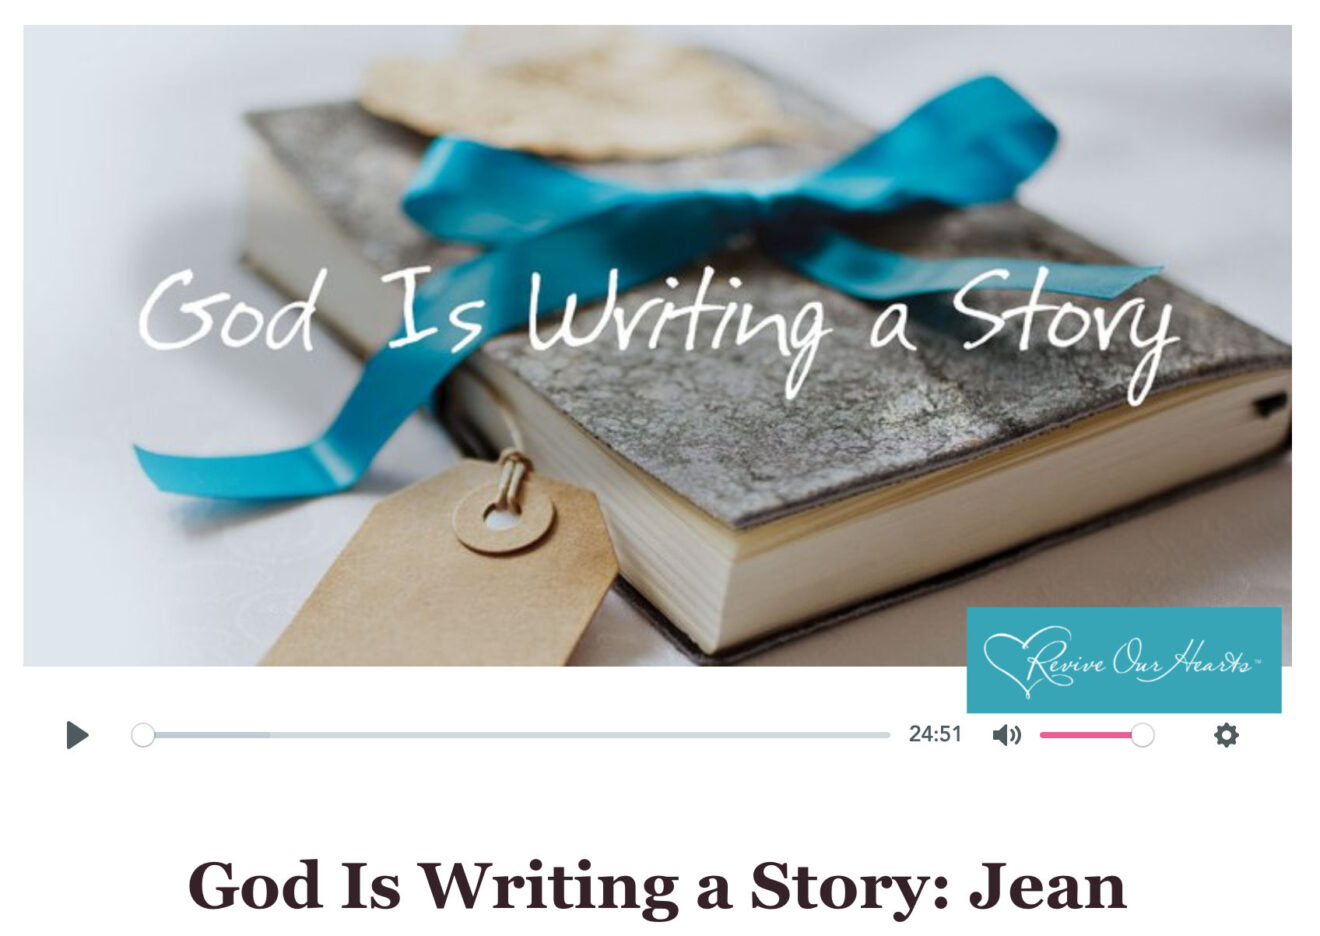 Pride and unforgiveness ruled my heart until God freed me through brokenness and revival. I tell my story with Revive our Hearts (Nancy DeMoss Wolgemuth and Dannah Gresh)